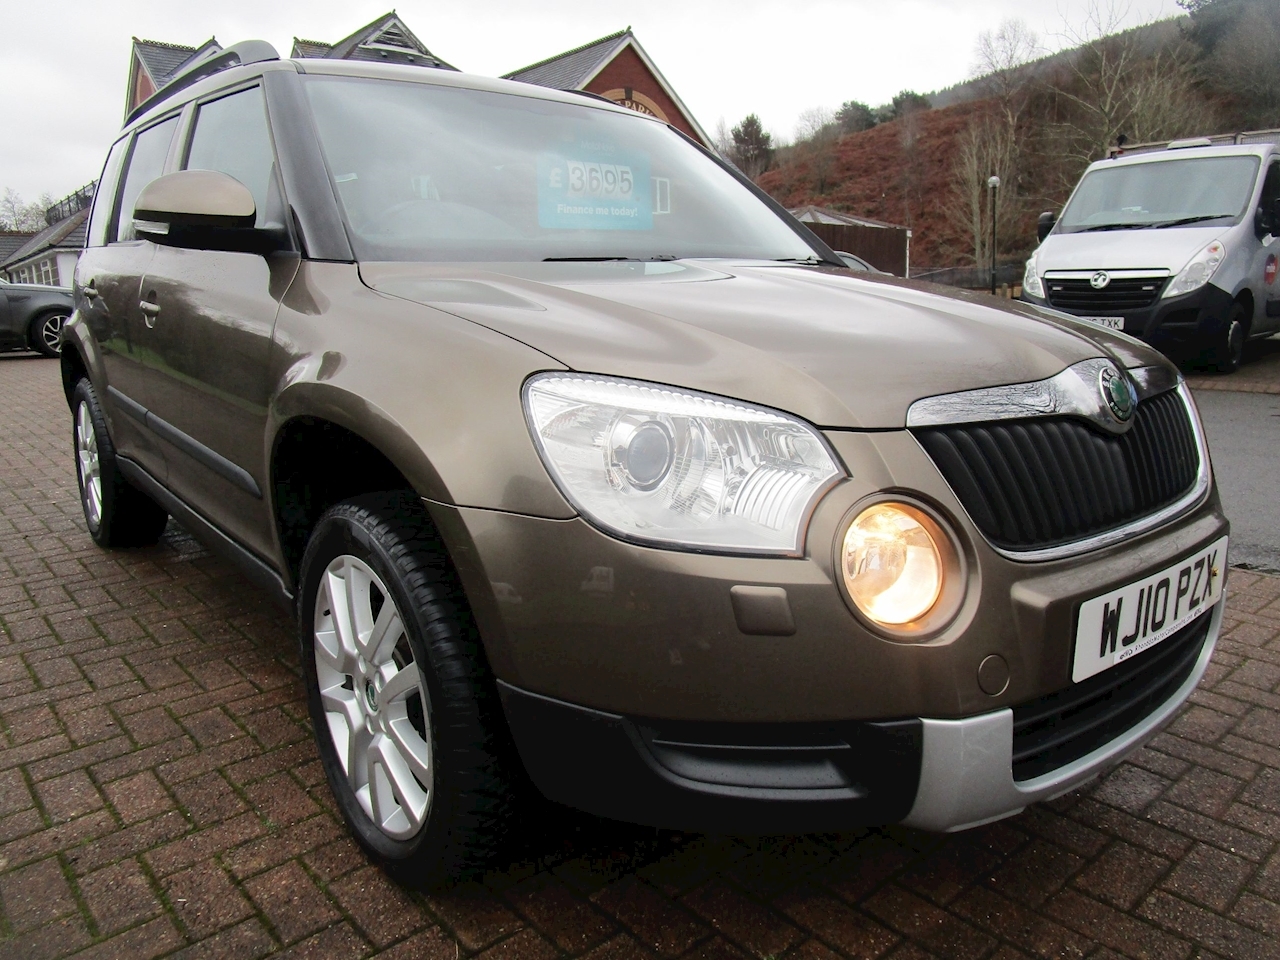 2010 (10) Skoda Yeti Elegance 1.8 TSi 4X4 5Dr in Mato Brown. 32k Miles. 10  Services. 2 Owners. £9990 